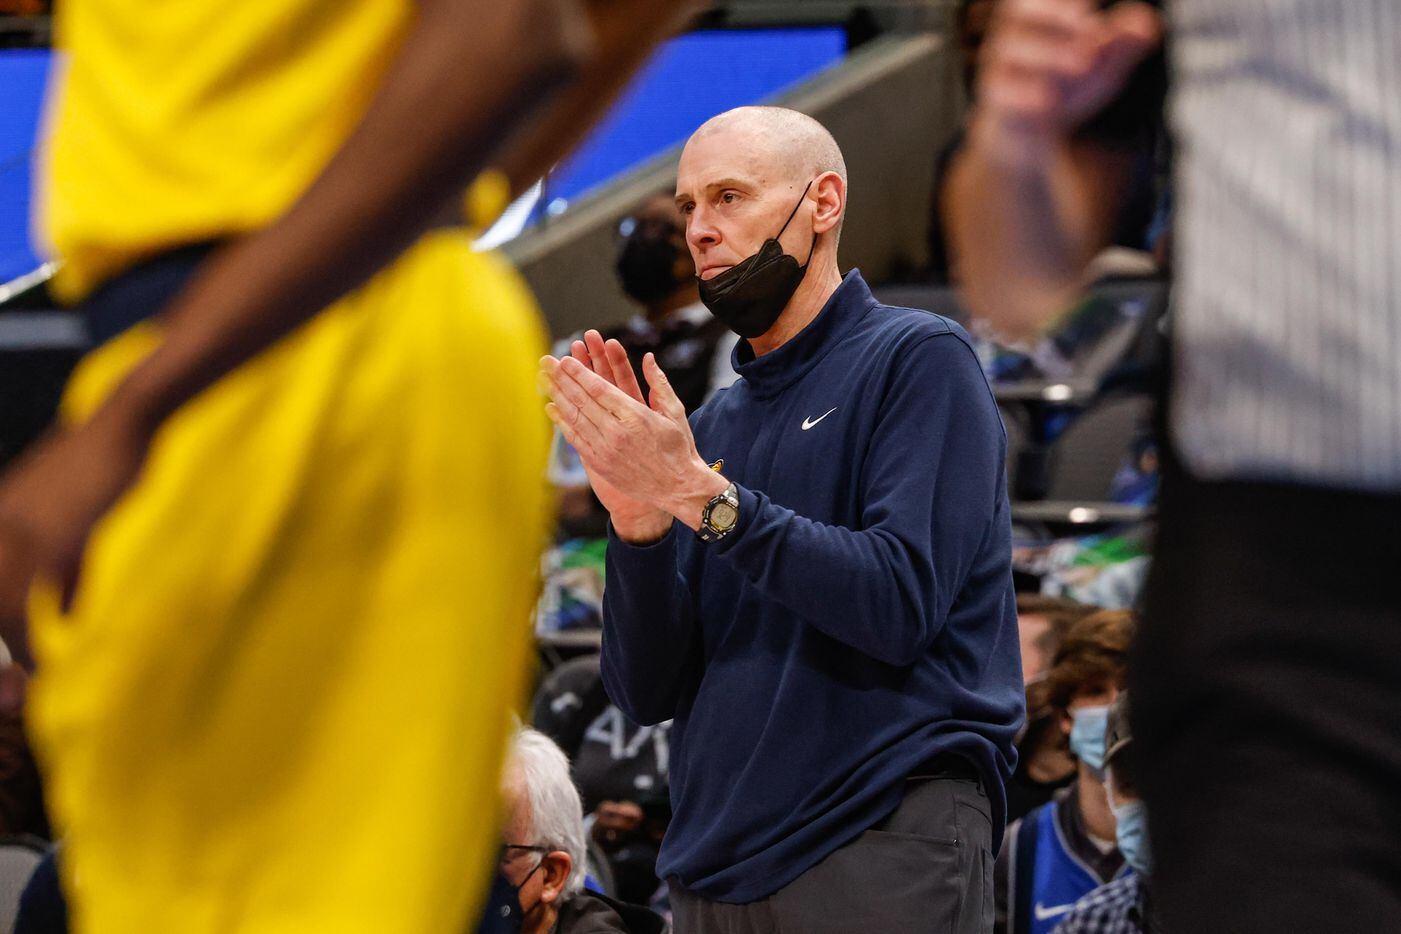 Indiana Pacers coach Rick Carlisle during a game against the Dallas Mavericks at the American Airlines Center in Dallas on Saturday, January 29, 2022.